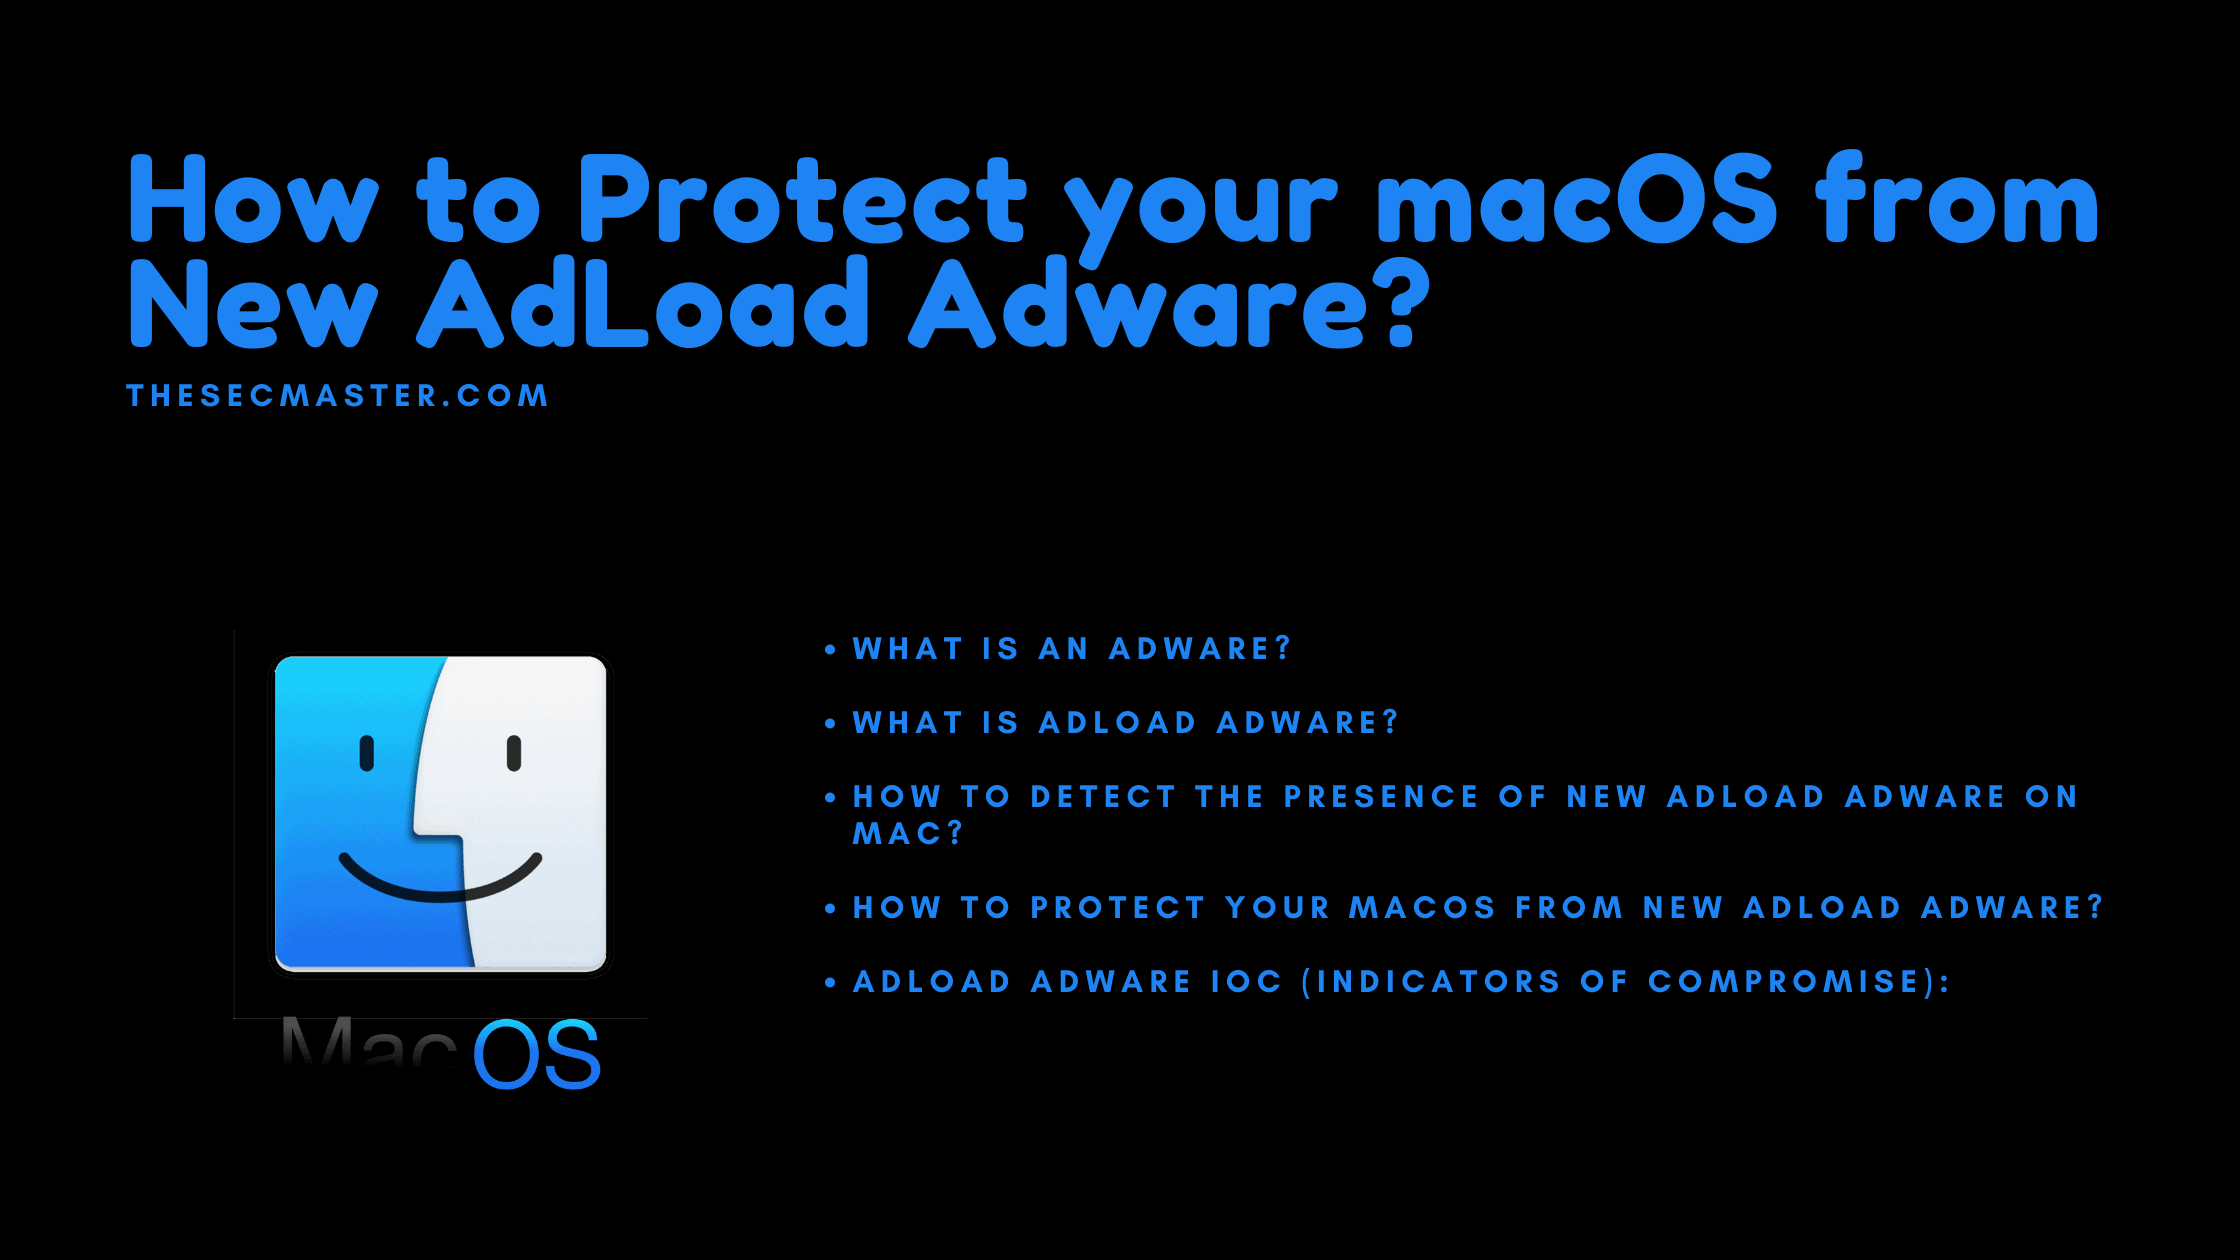 How To Protect Your Macos From New Adload Adware